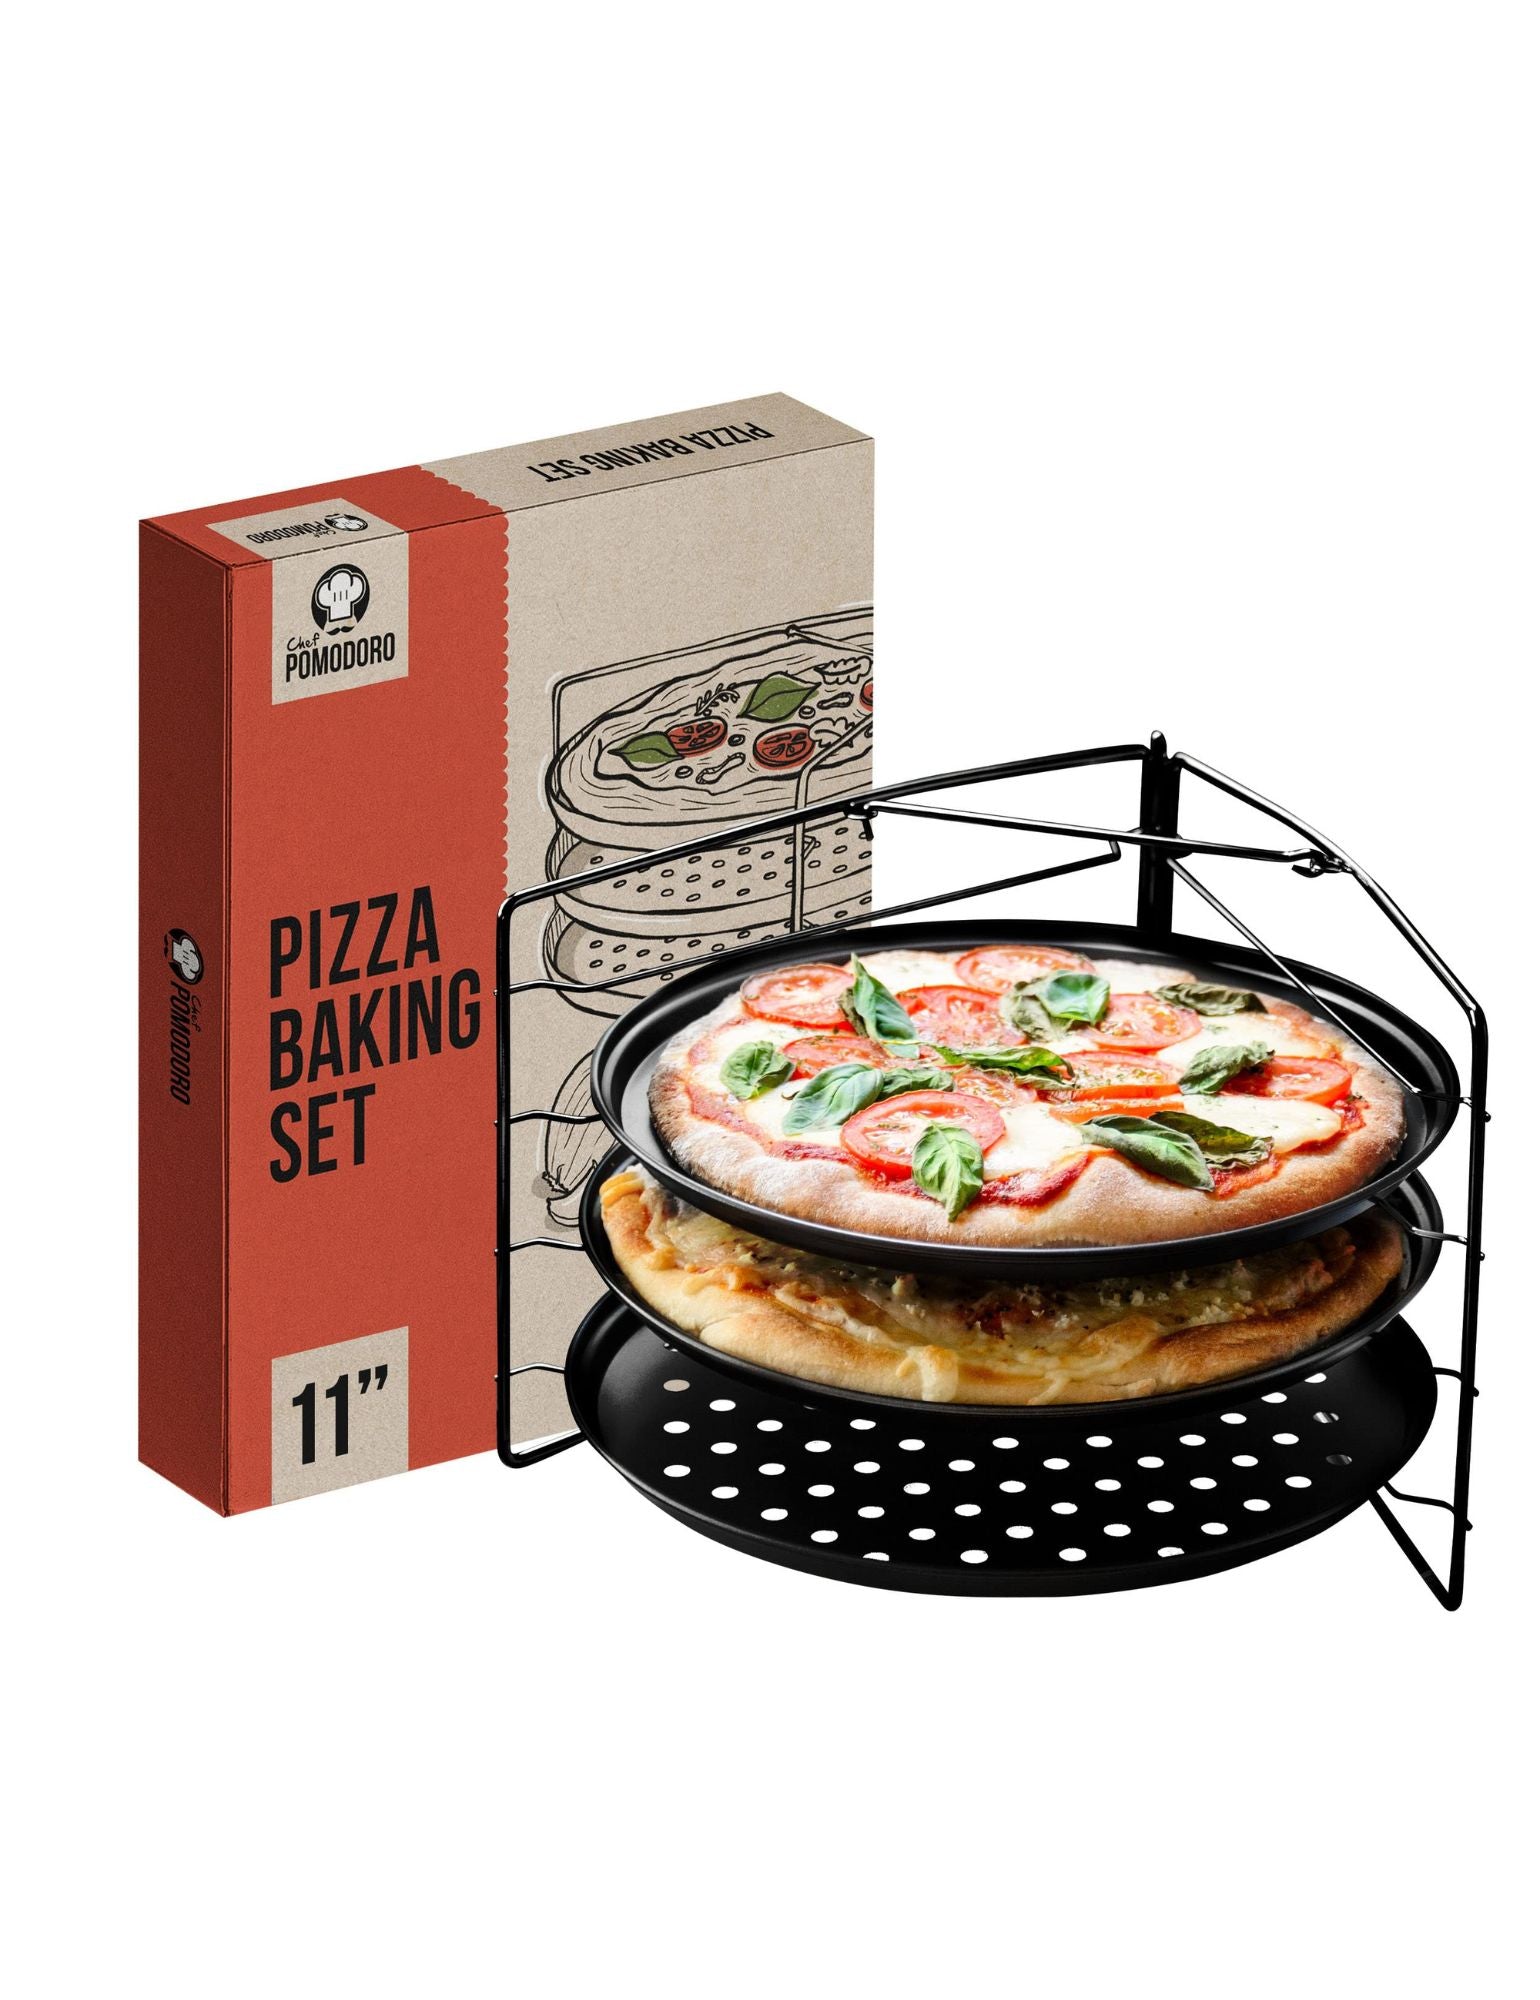  Chef Pomodoro Chicago Deep Dish Pizza Pan 12 Inch, Hard  Anodized Aluminum Pizza Pan for Oven, Pre-Seasoned Bakeware Kitchenware,  Non-Stick Round Pizza Pans (12-Inch): Home & Kitchen